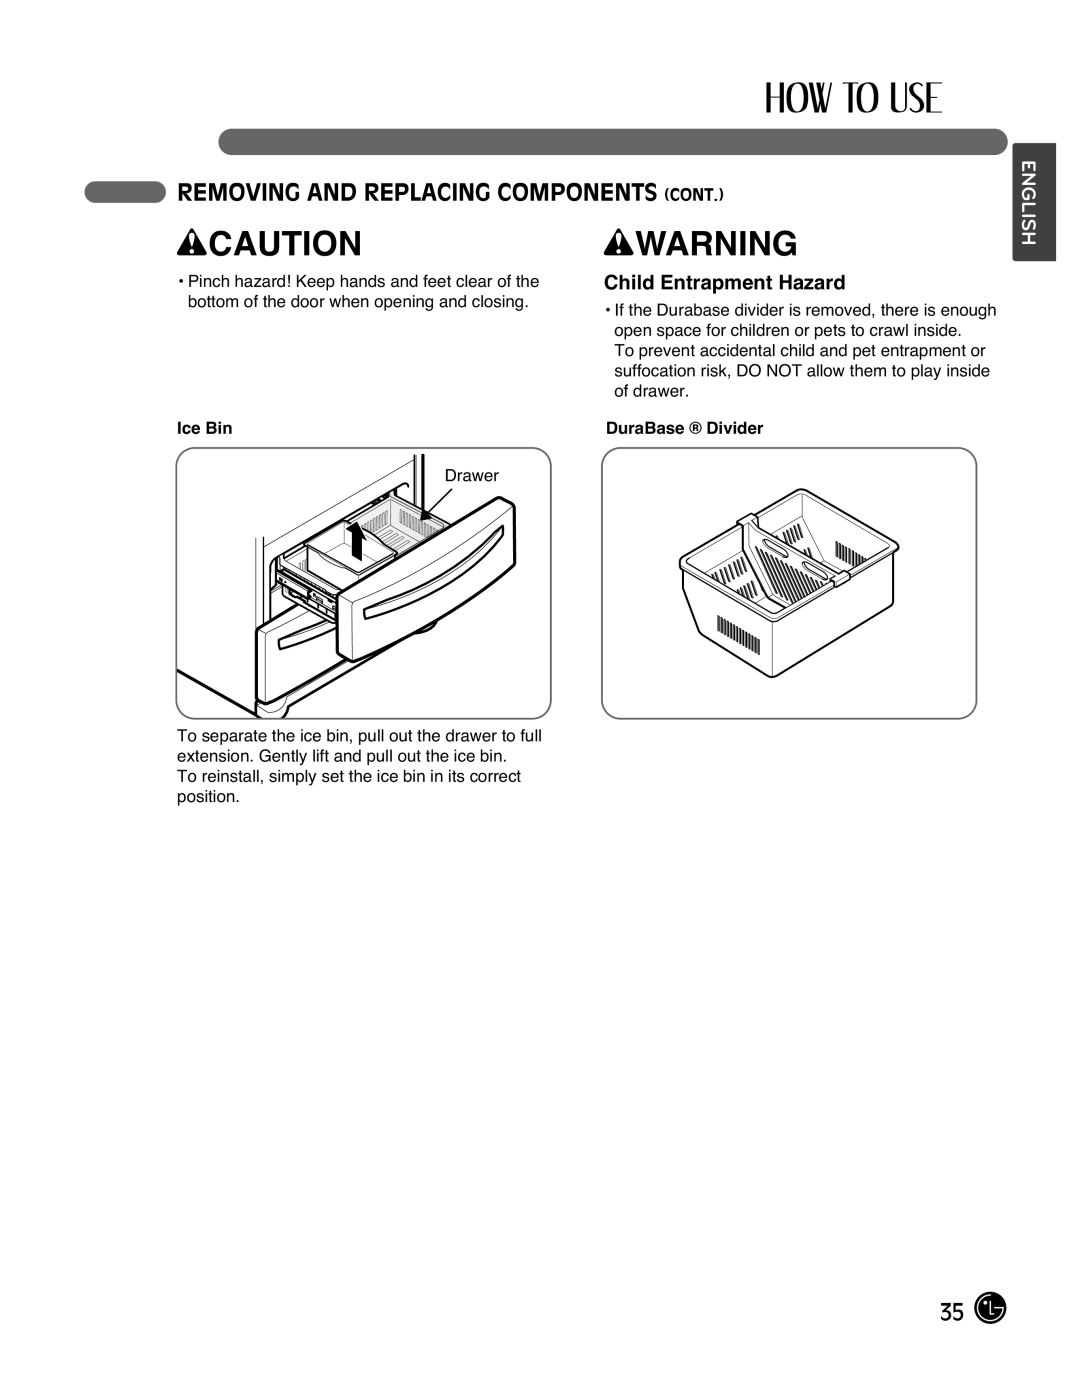 LG Electronics LMX25988ST Child Entrapment Hazard, wCAUTION, wWARNING, Removing And Replacing Components Cont, Ice Bin 